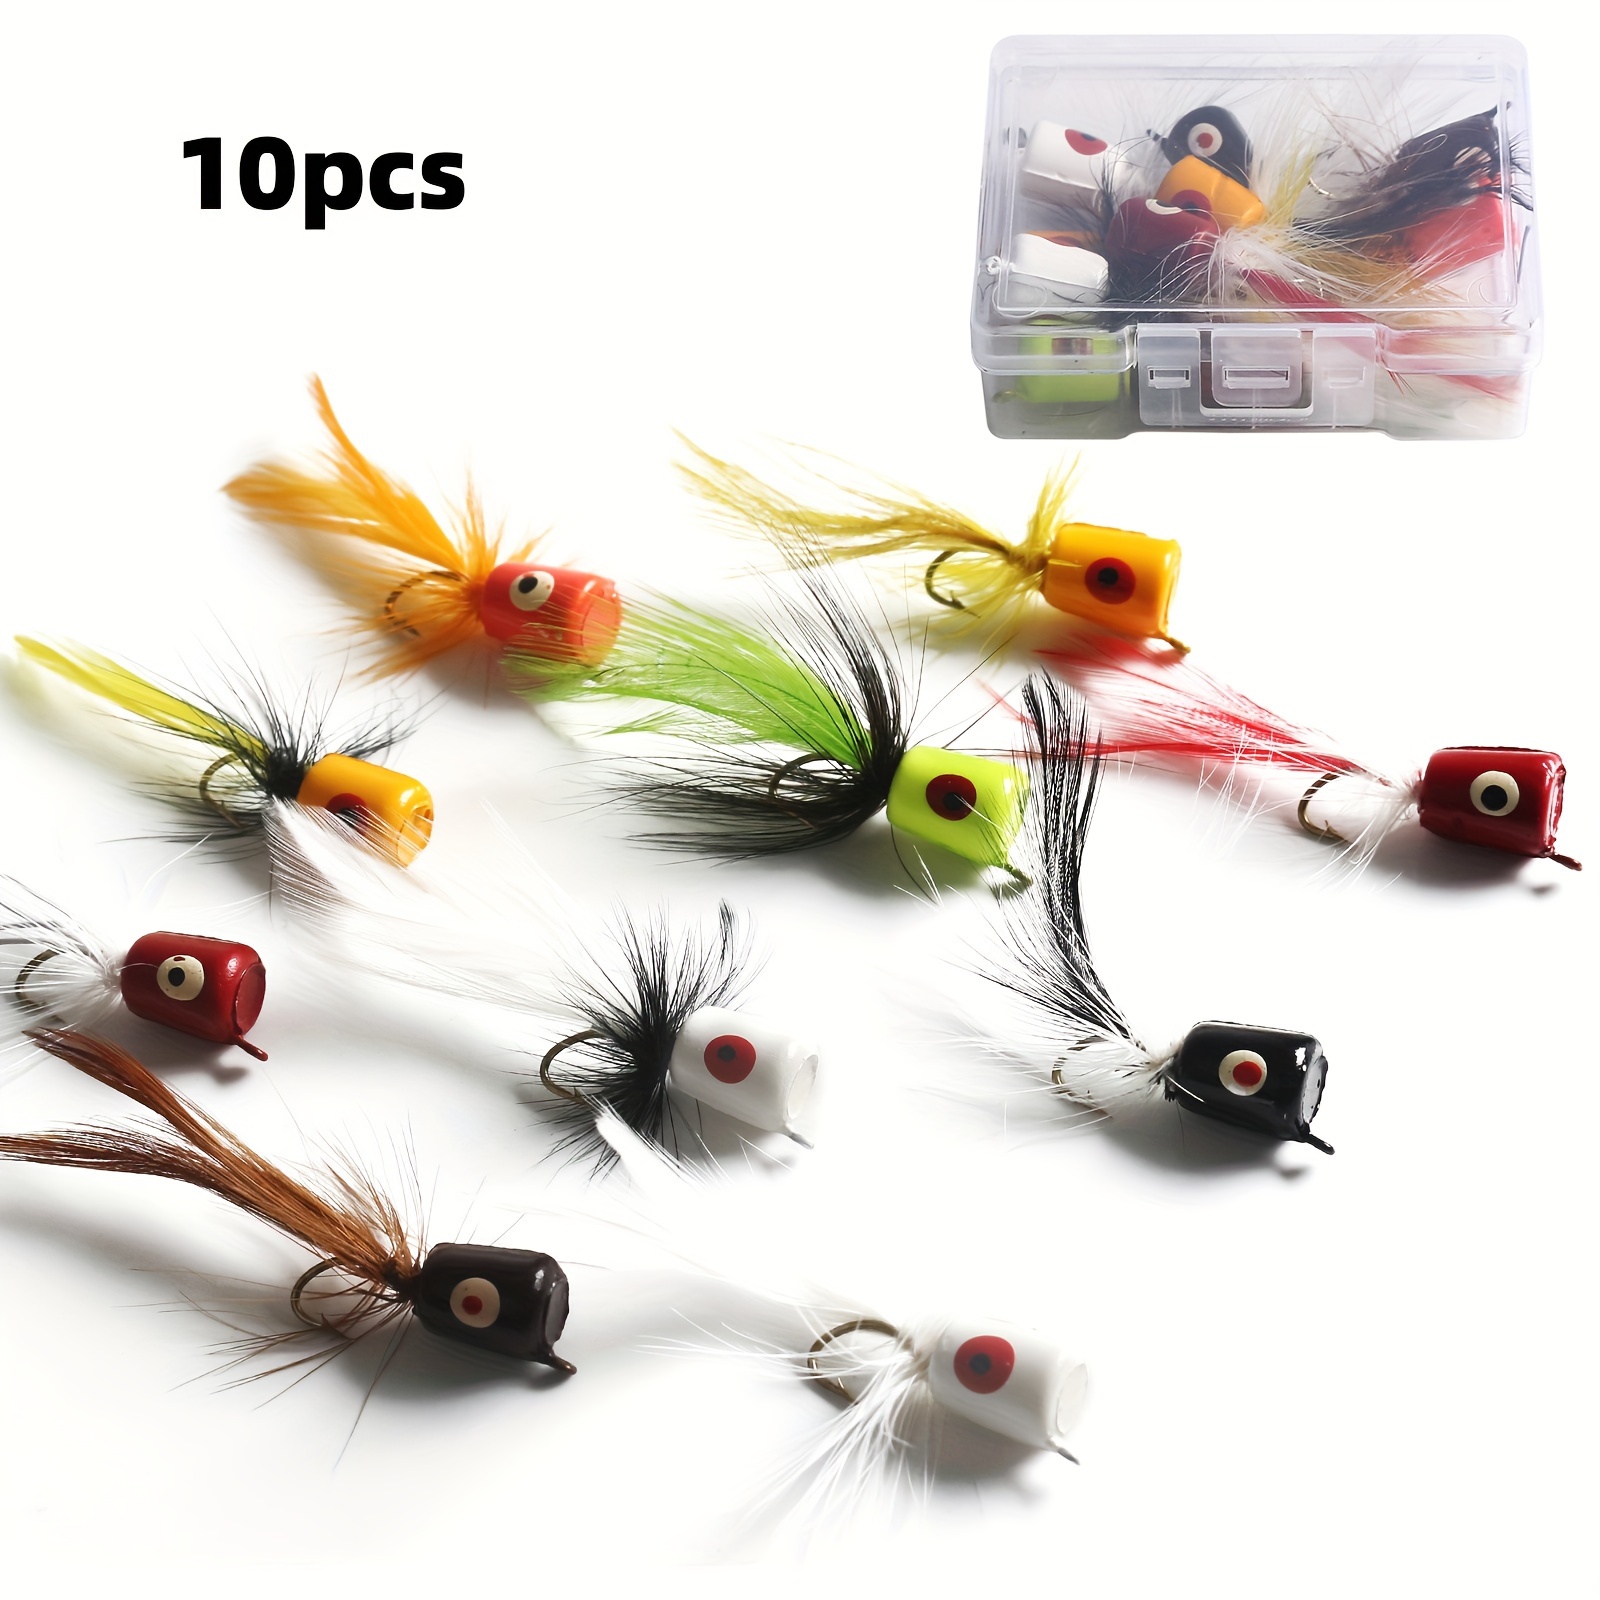 

10pcs/box Fishing Popper Fly Lure, Fly Hook, Bionic Flies For Bass Bluefish Trout